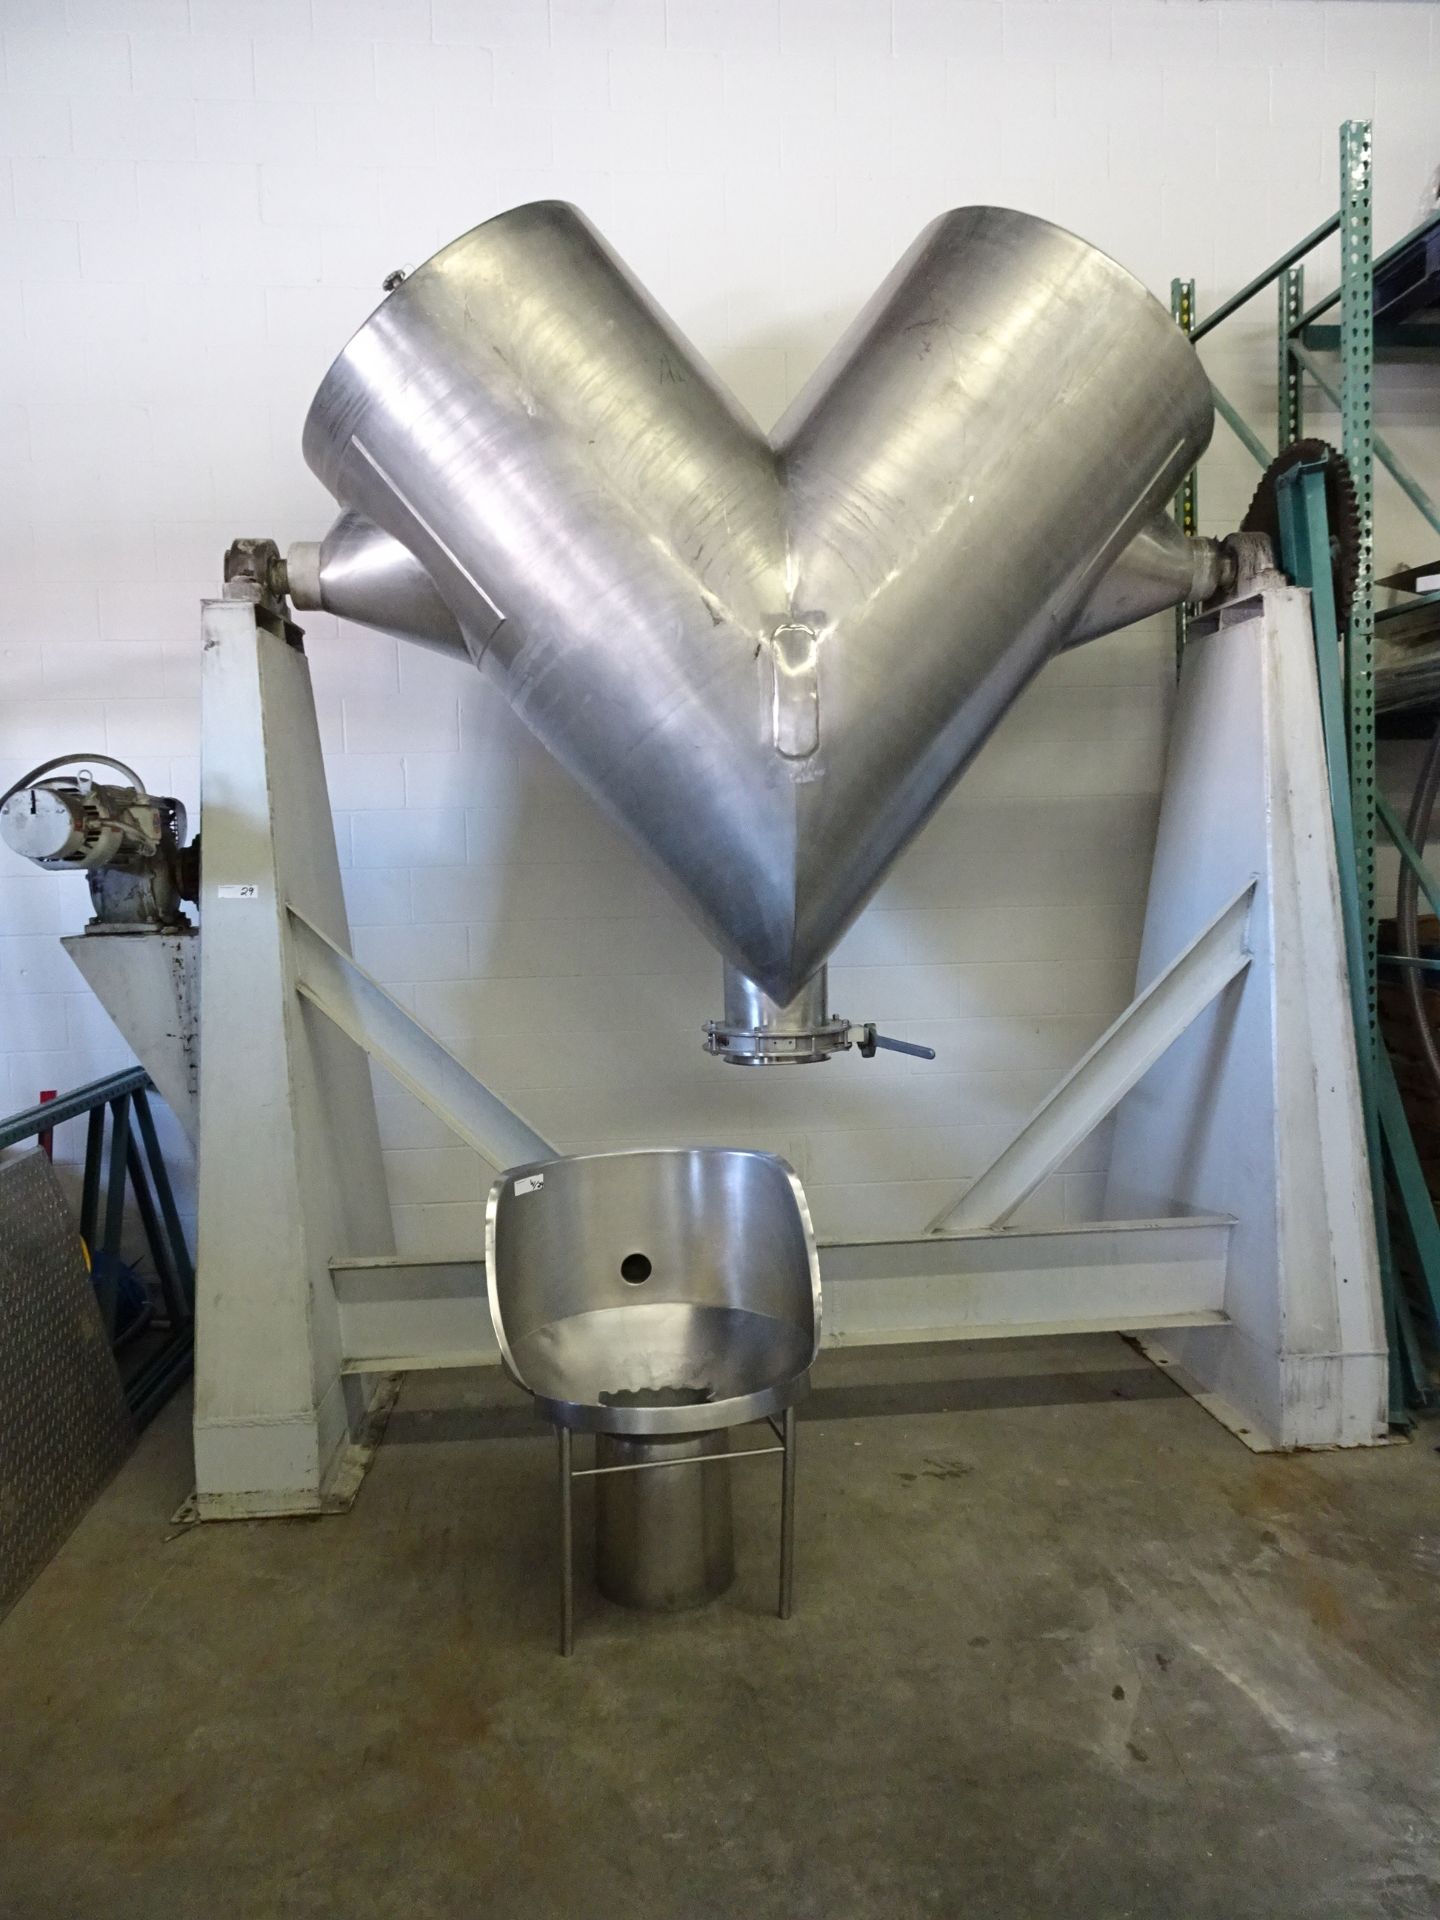 Approximately 50 Cubic Foot V-Shaped Vertical Blender. Please Note Disassembled To Bring Into